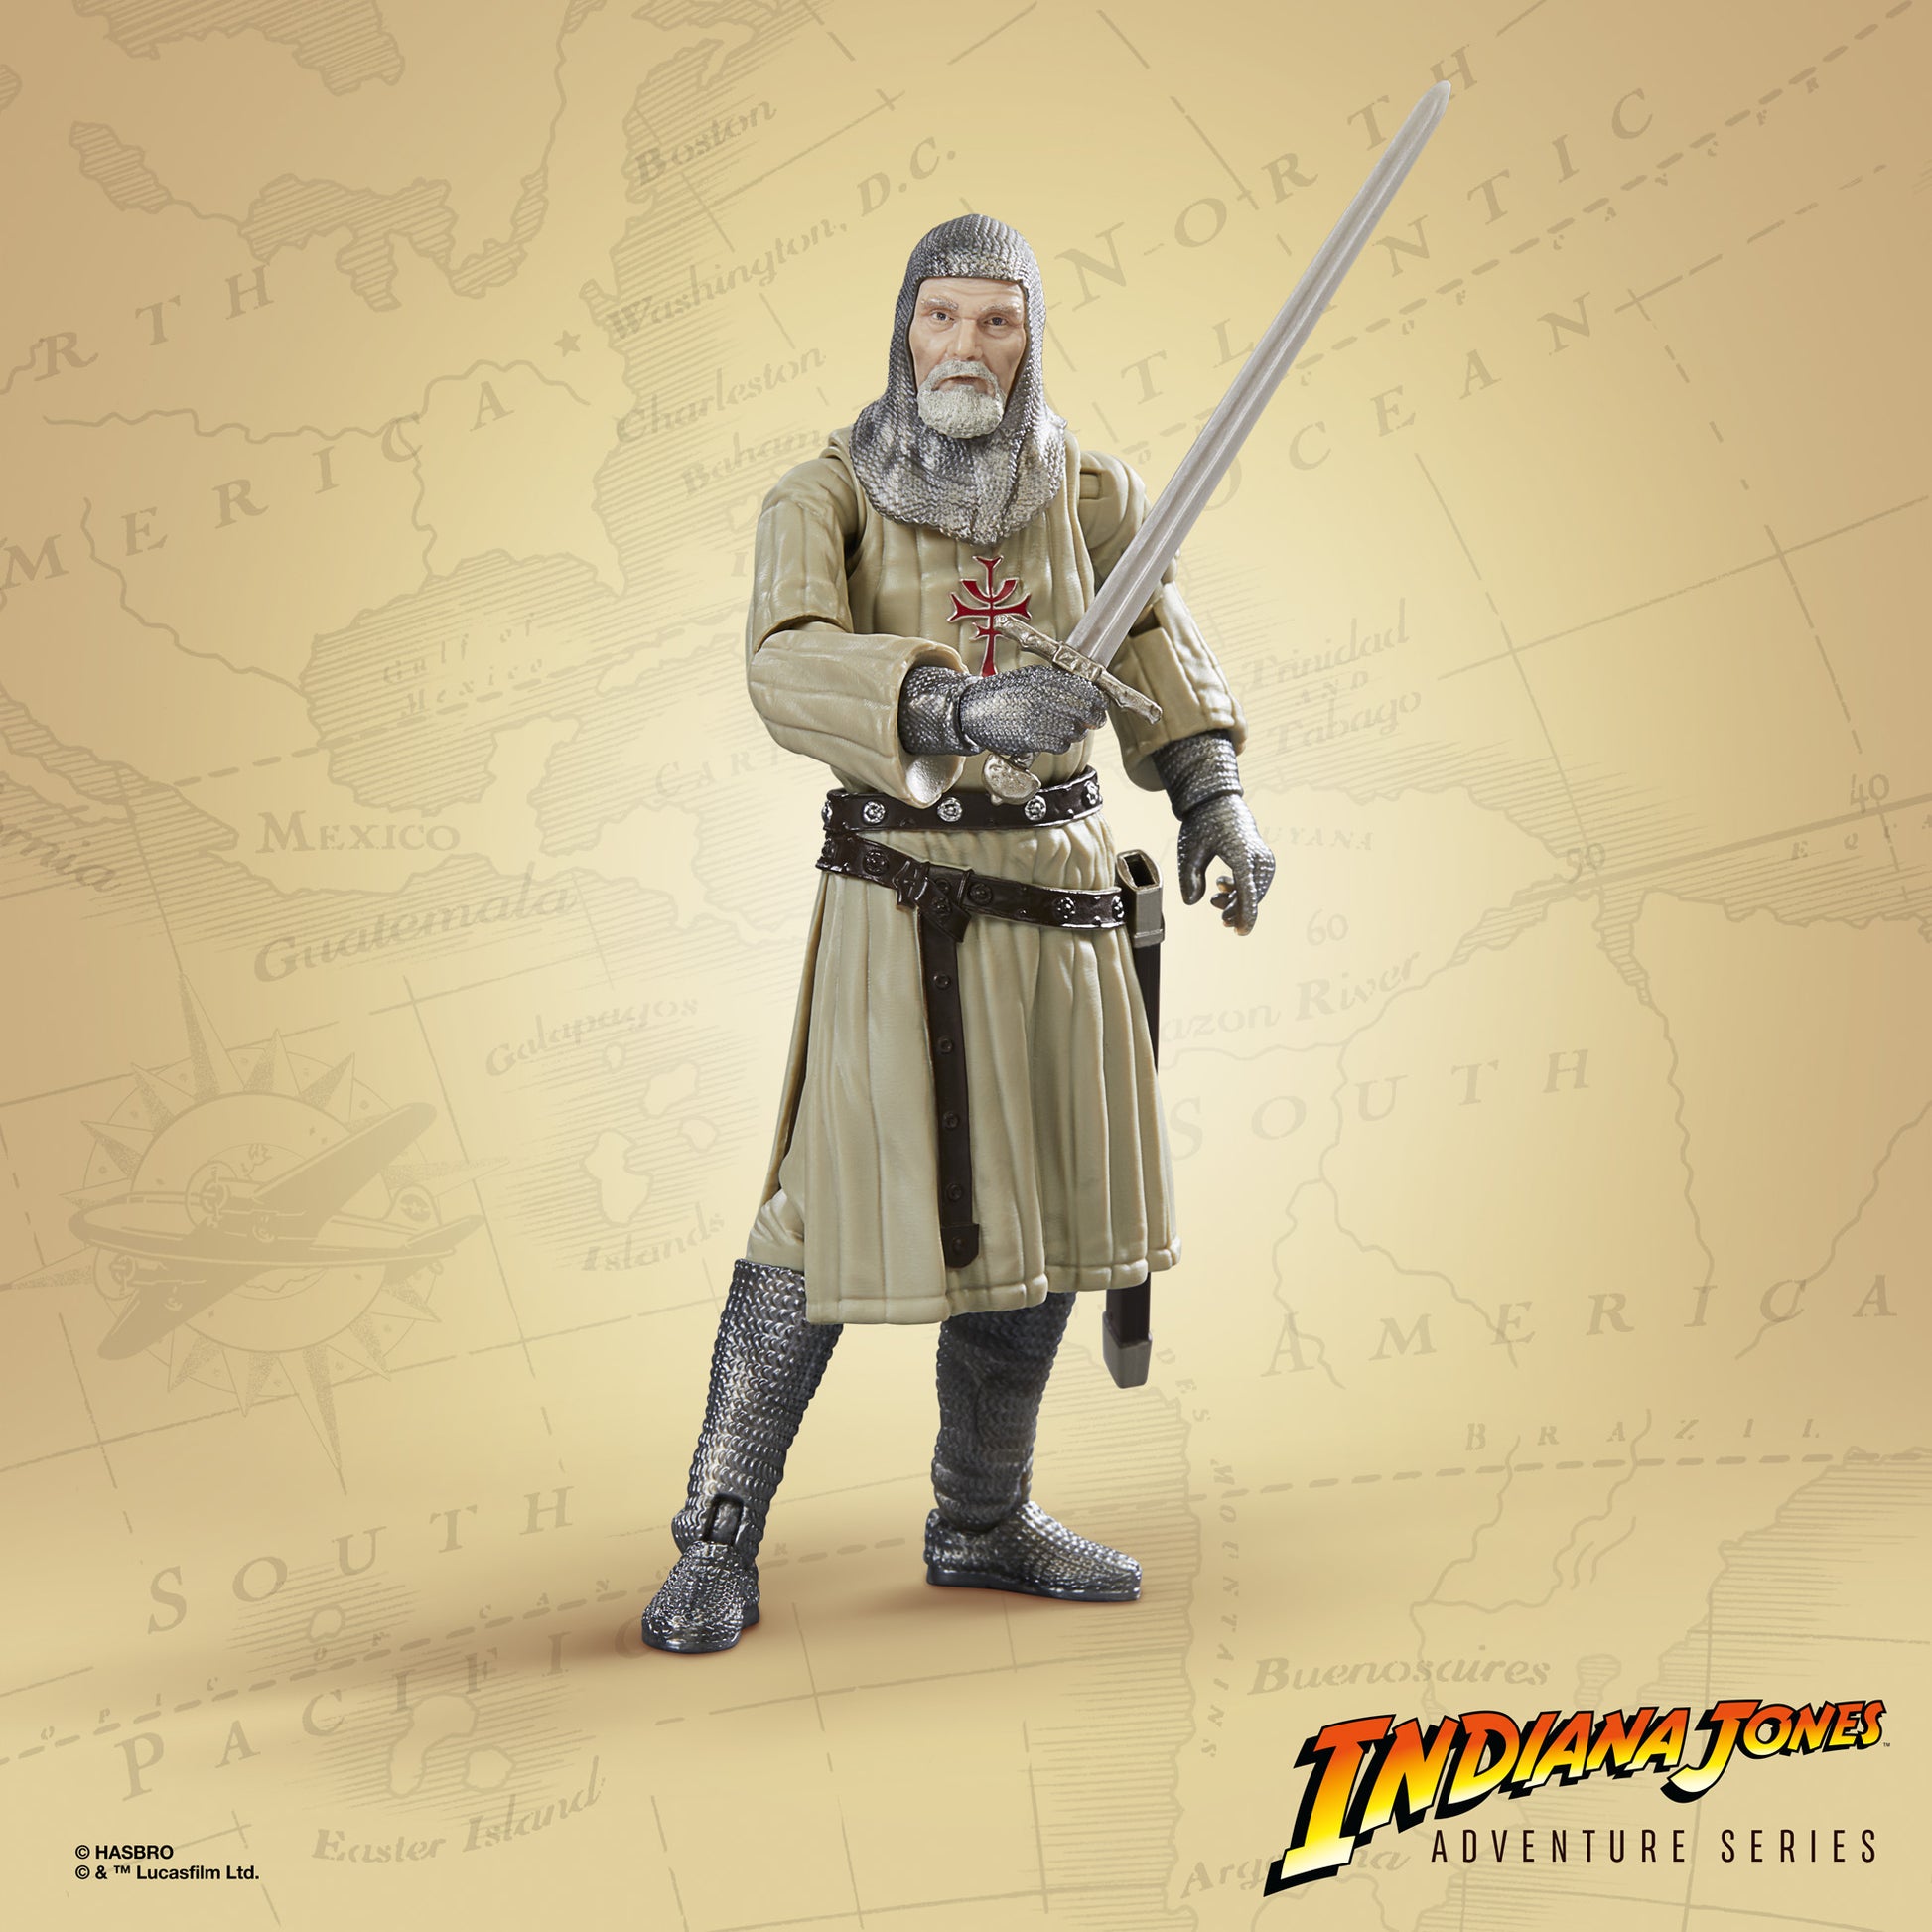 Indiana Jones Adventure Series Grail Knight Action Figure Toy - HTSY